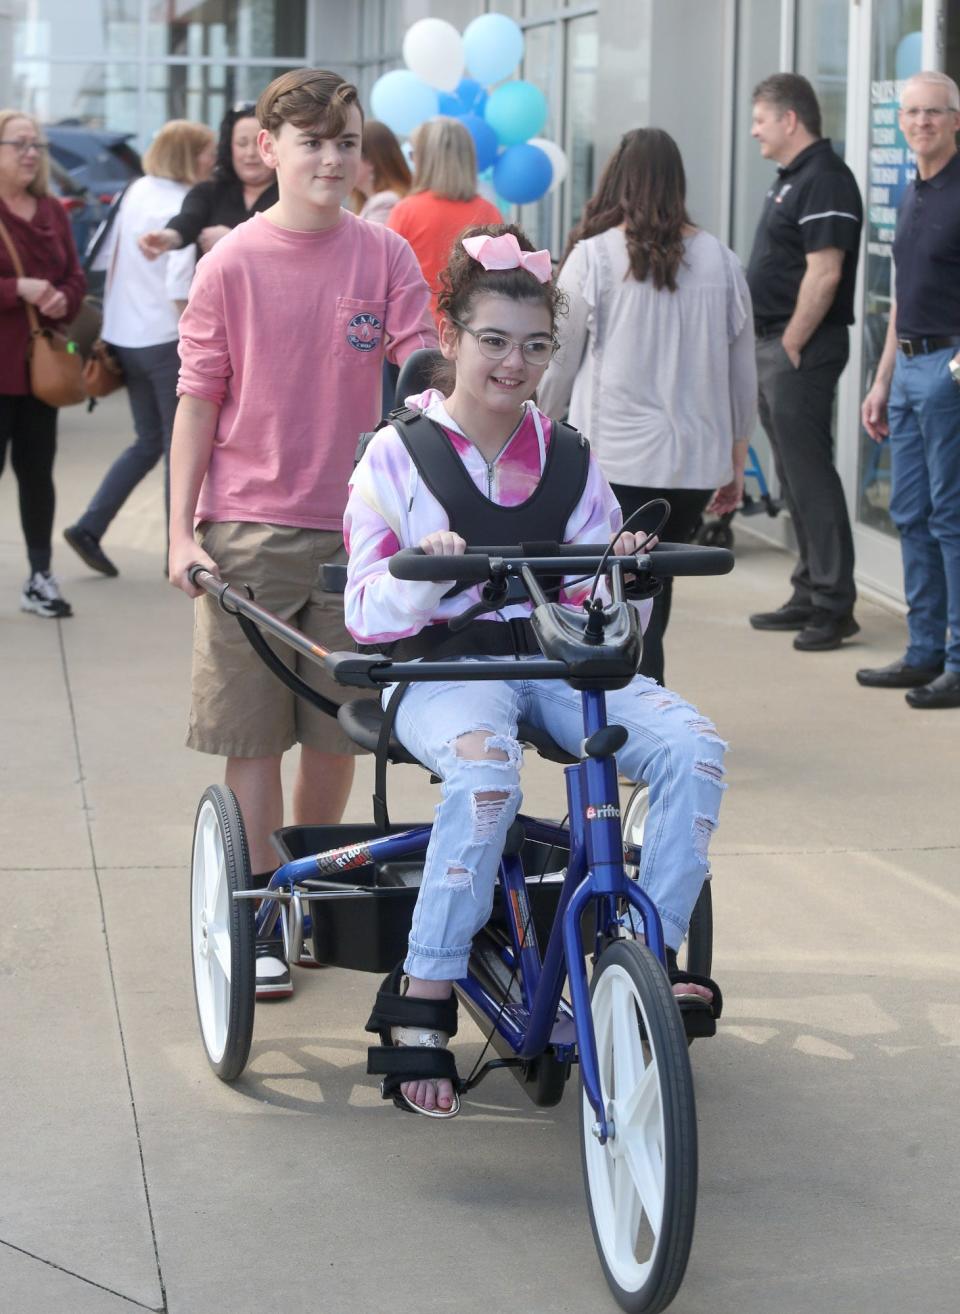 Joey McClure, left, helps big sister Miah navigate her new adaptive tricycle, which was presented to the Hoover High School student at Cain Toyota-BMW this week.